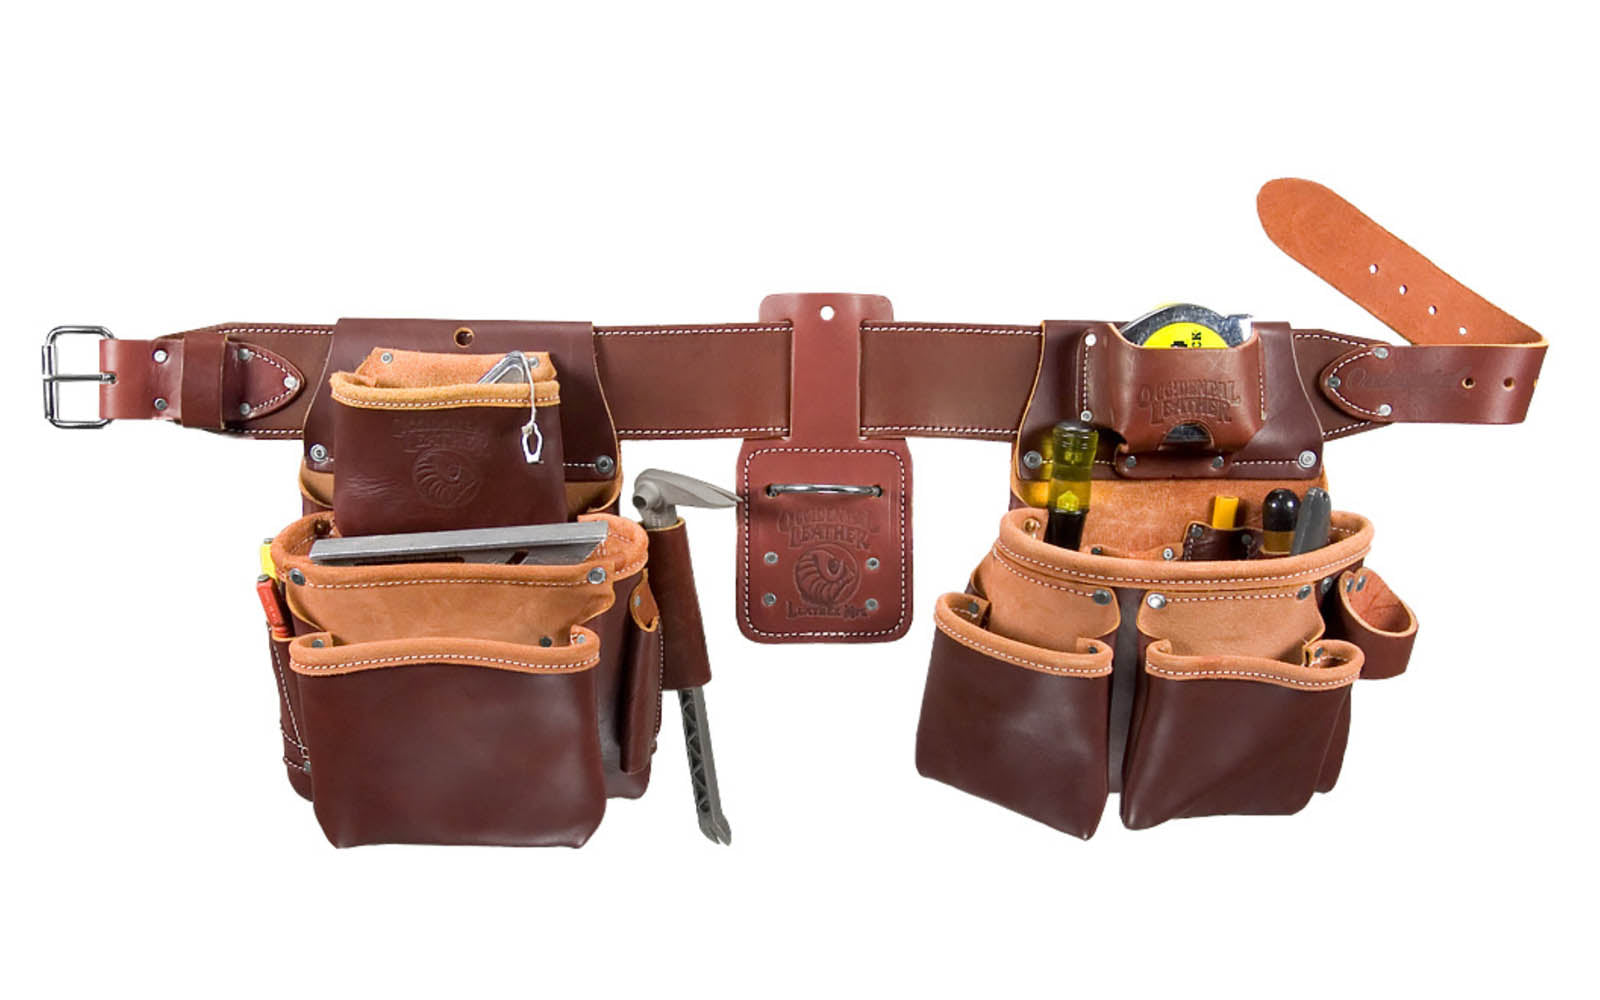 Occidental Leather "Pro Framer" Tool Belt Set Package with Double Outer Bags ~ 5080DB LG - Large Belt Size (3" Large Ranger Work Belt) - Top-Grain Leather - Copper Rivets Reinforce Main Bags - 22 pockets - 759244019001. "Pro Leather" series is made of premium top grain cow hides tanned with oils & waxes for heavy use